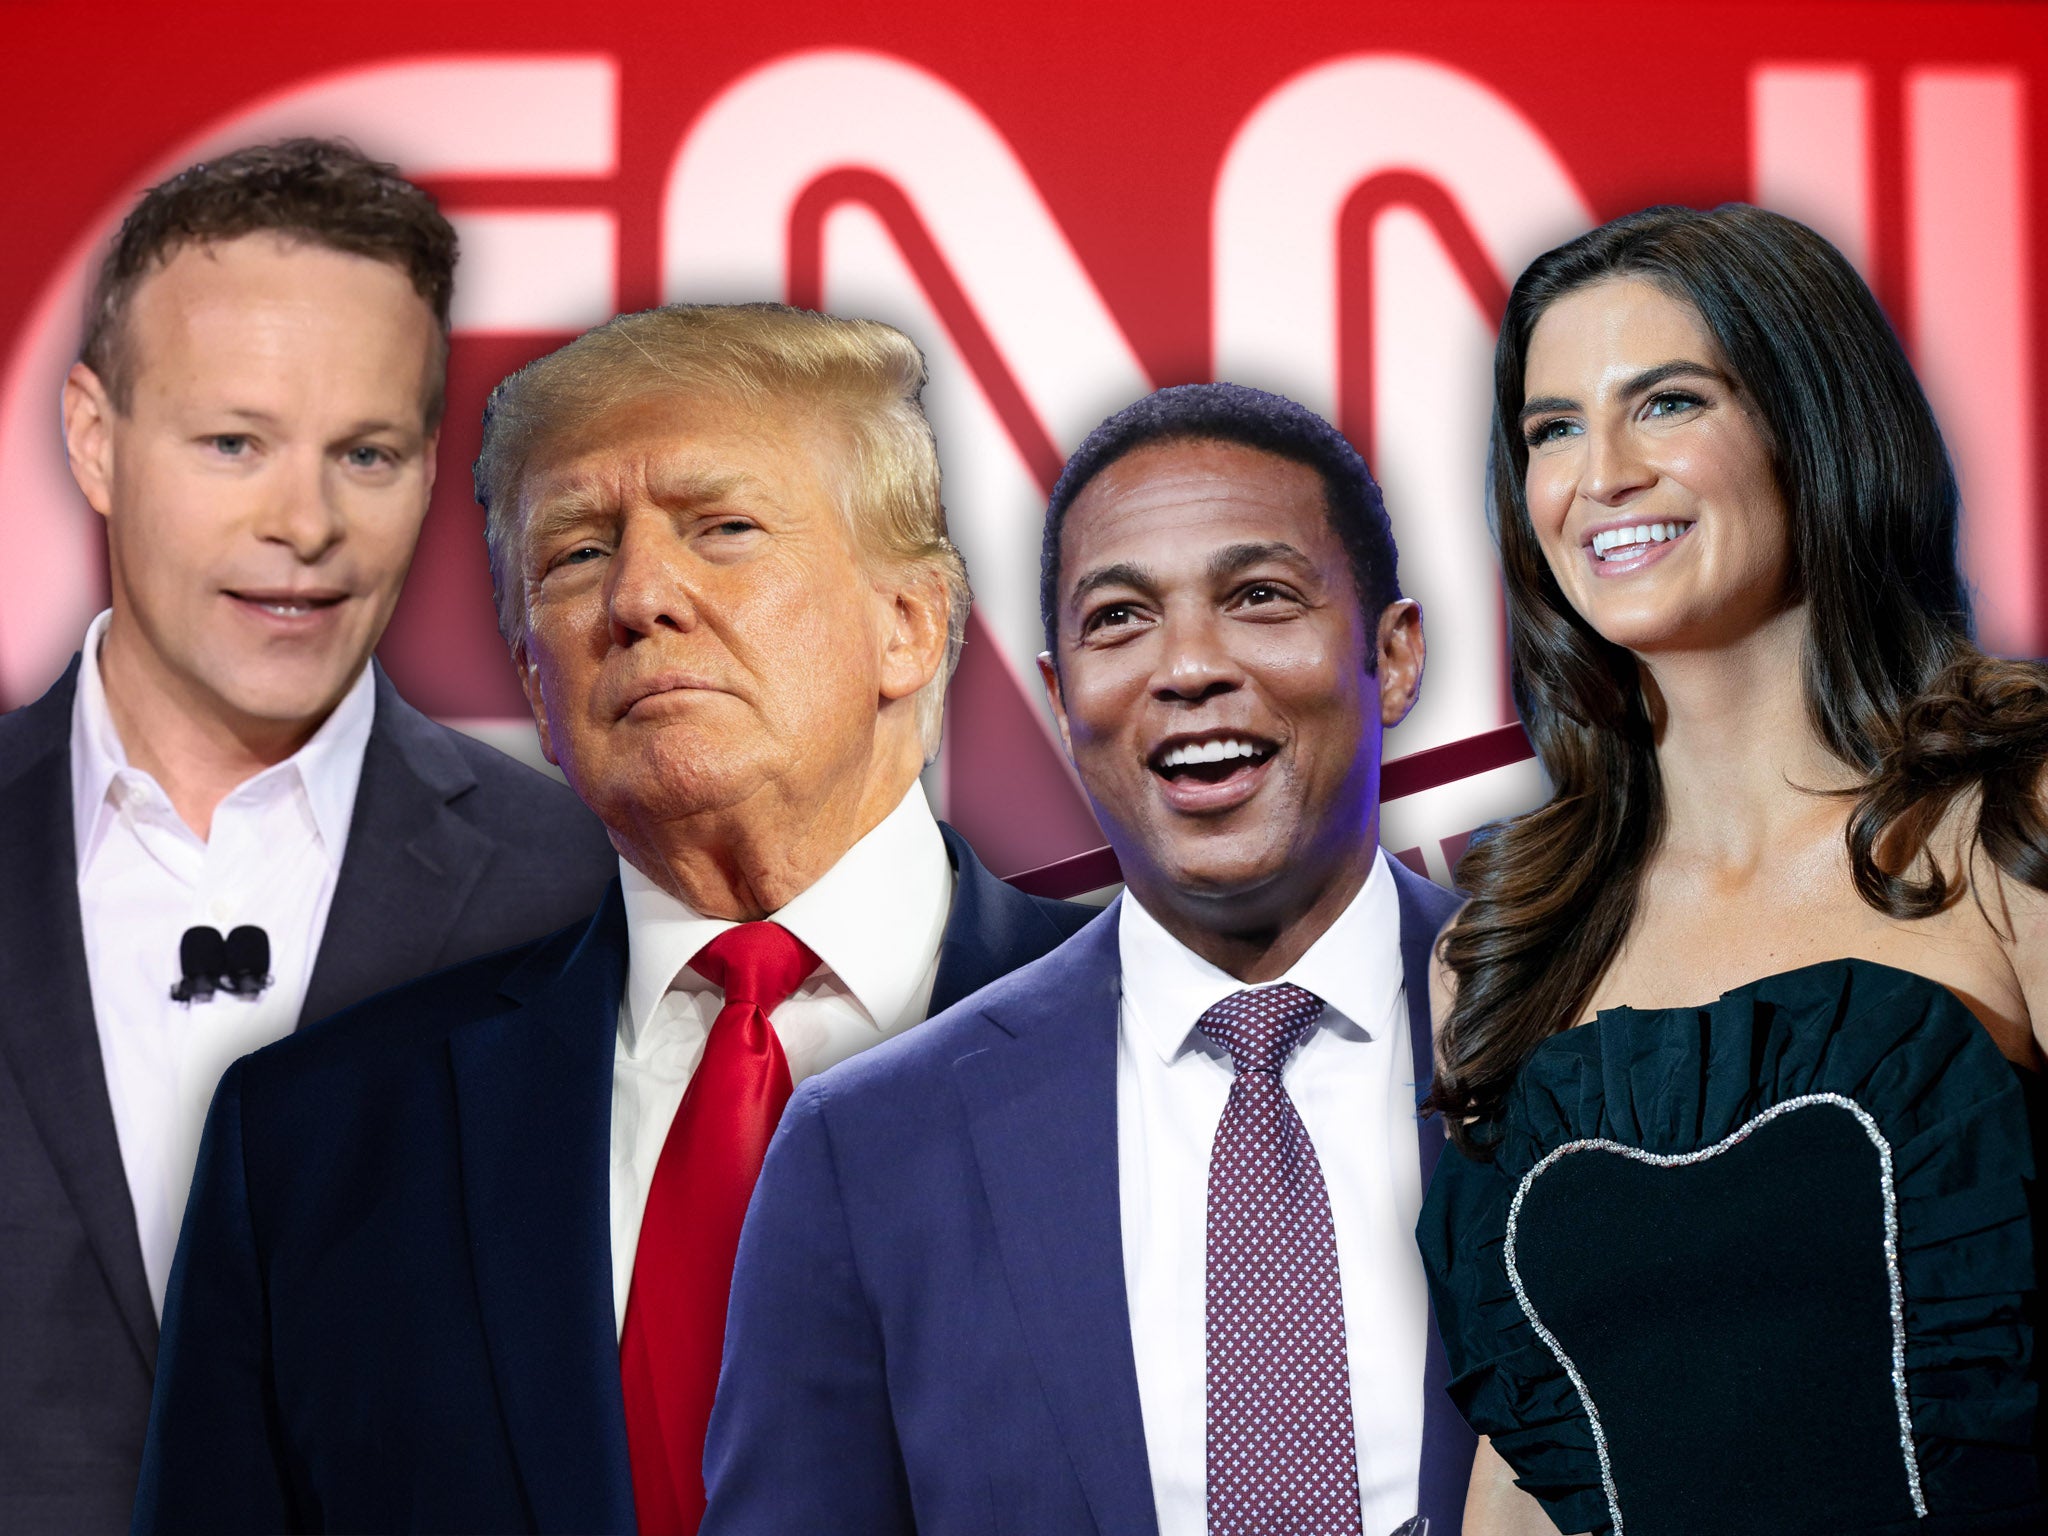 Ousted CNN boss Chris Licht, left, with Donald Trump, Don Lemon and Kaitlin Collins